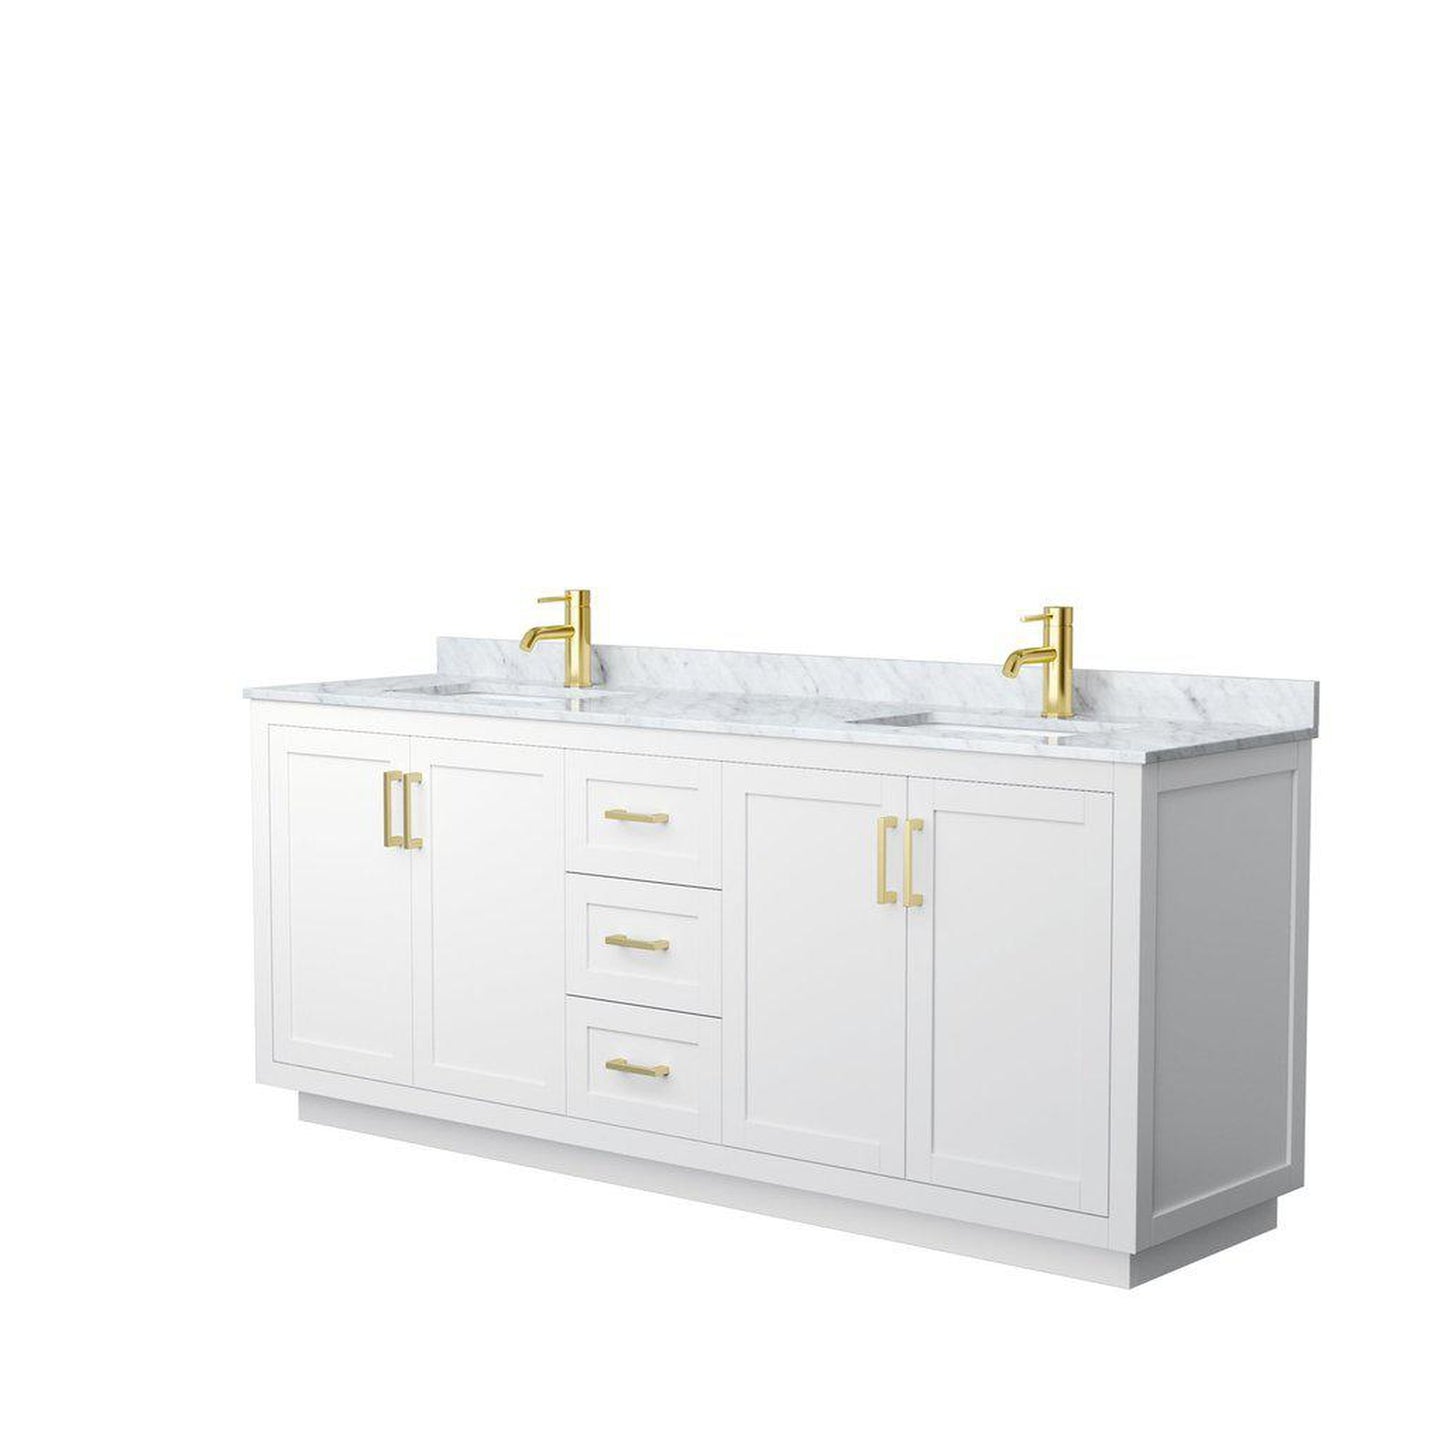 Wyndham Collection Miranda 80" Double Bathroom White Vanity Set With White Carrara Marble Countertop, Undermount Square Sink, And Brushed Gold Trim